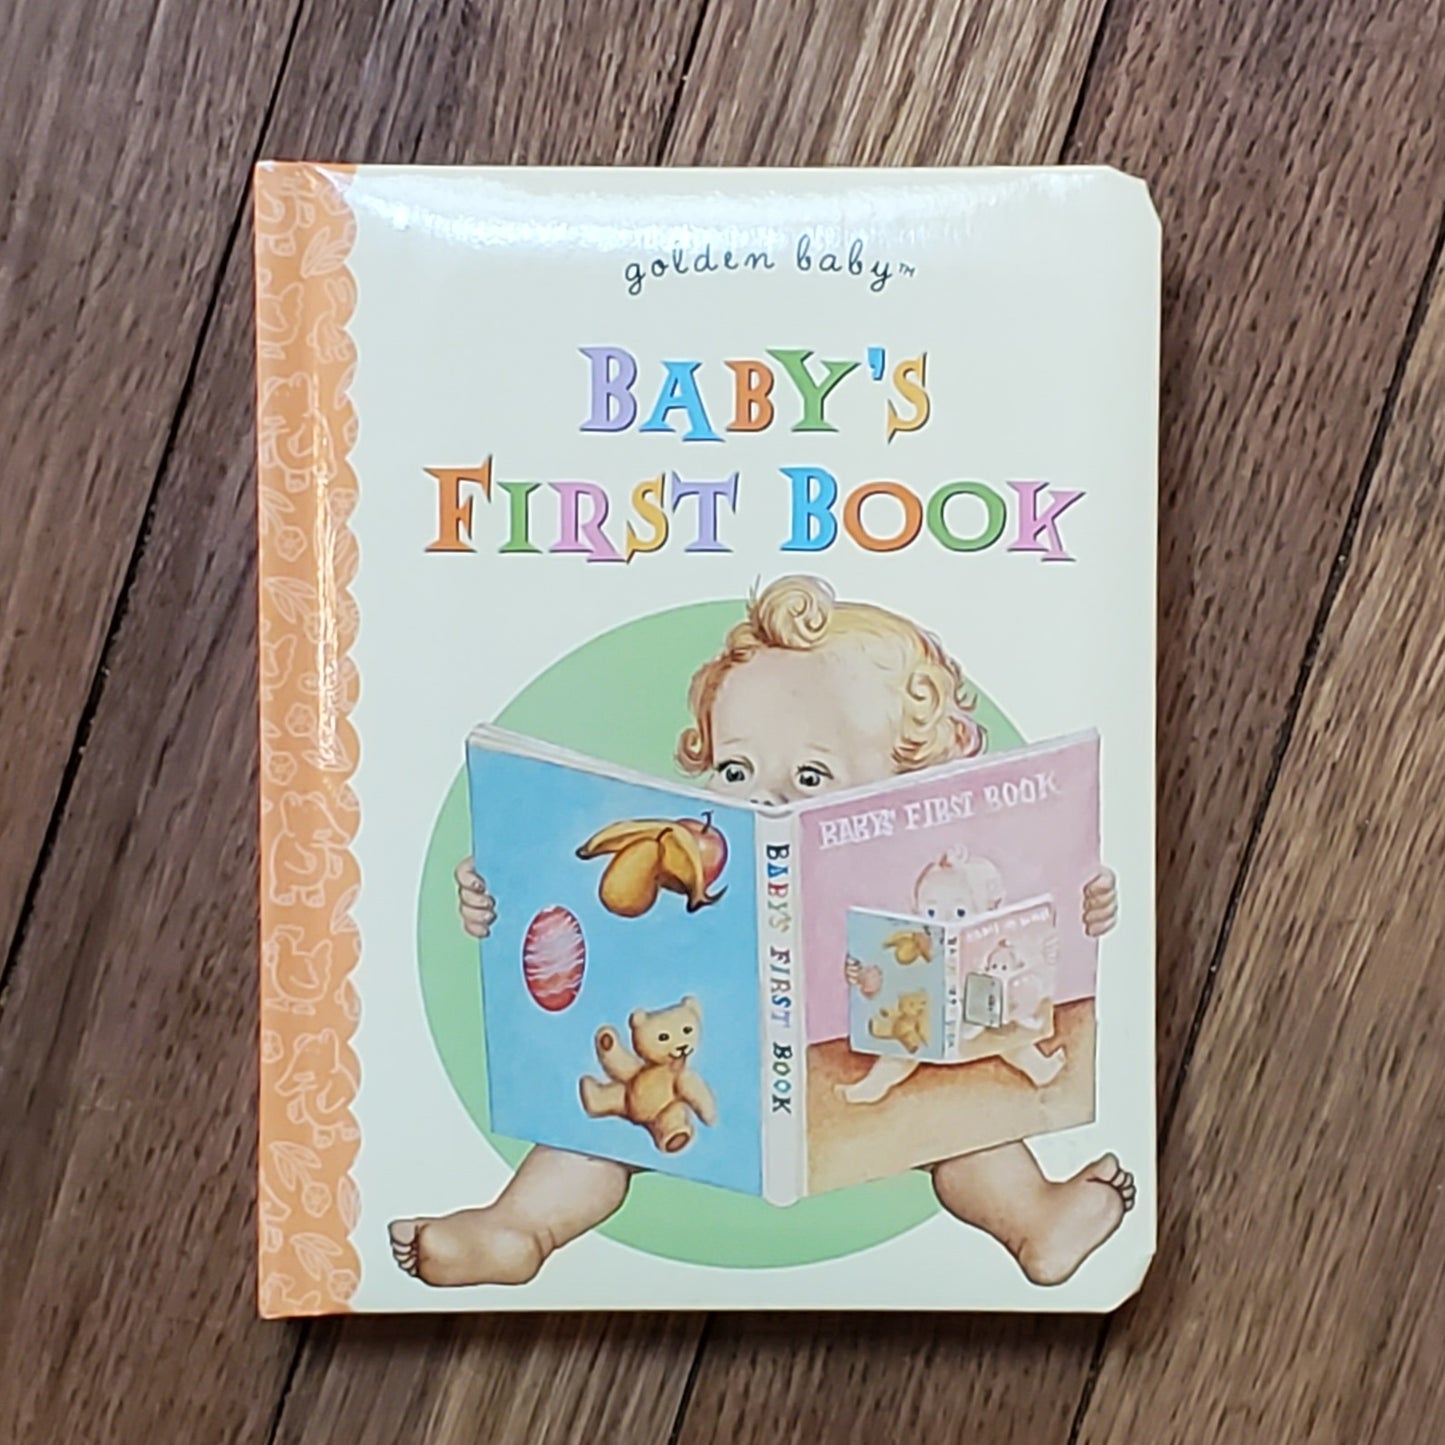 GB Board Book - Baby's First Book